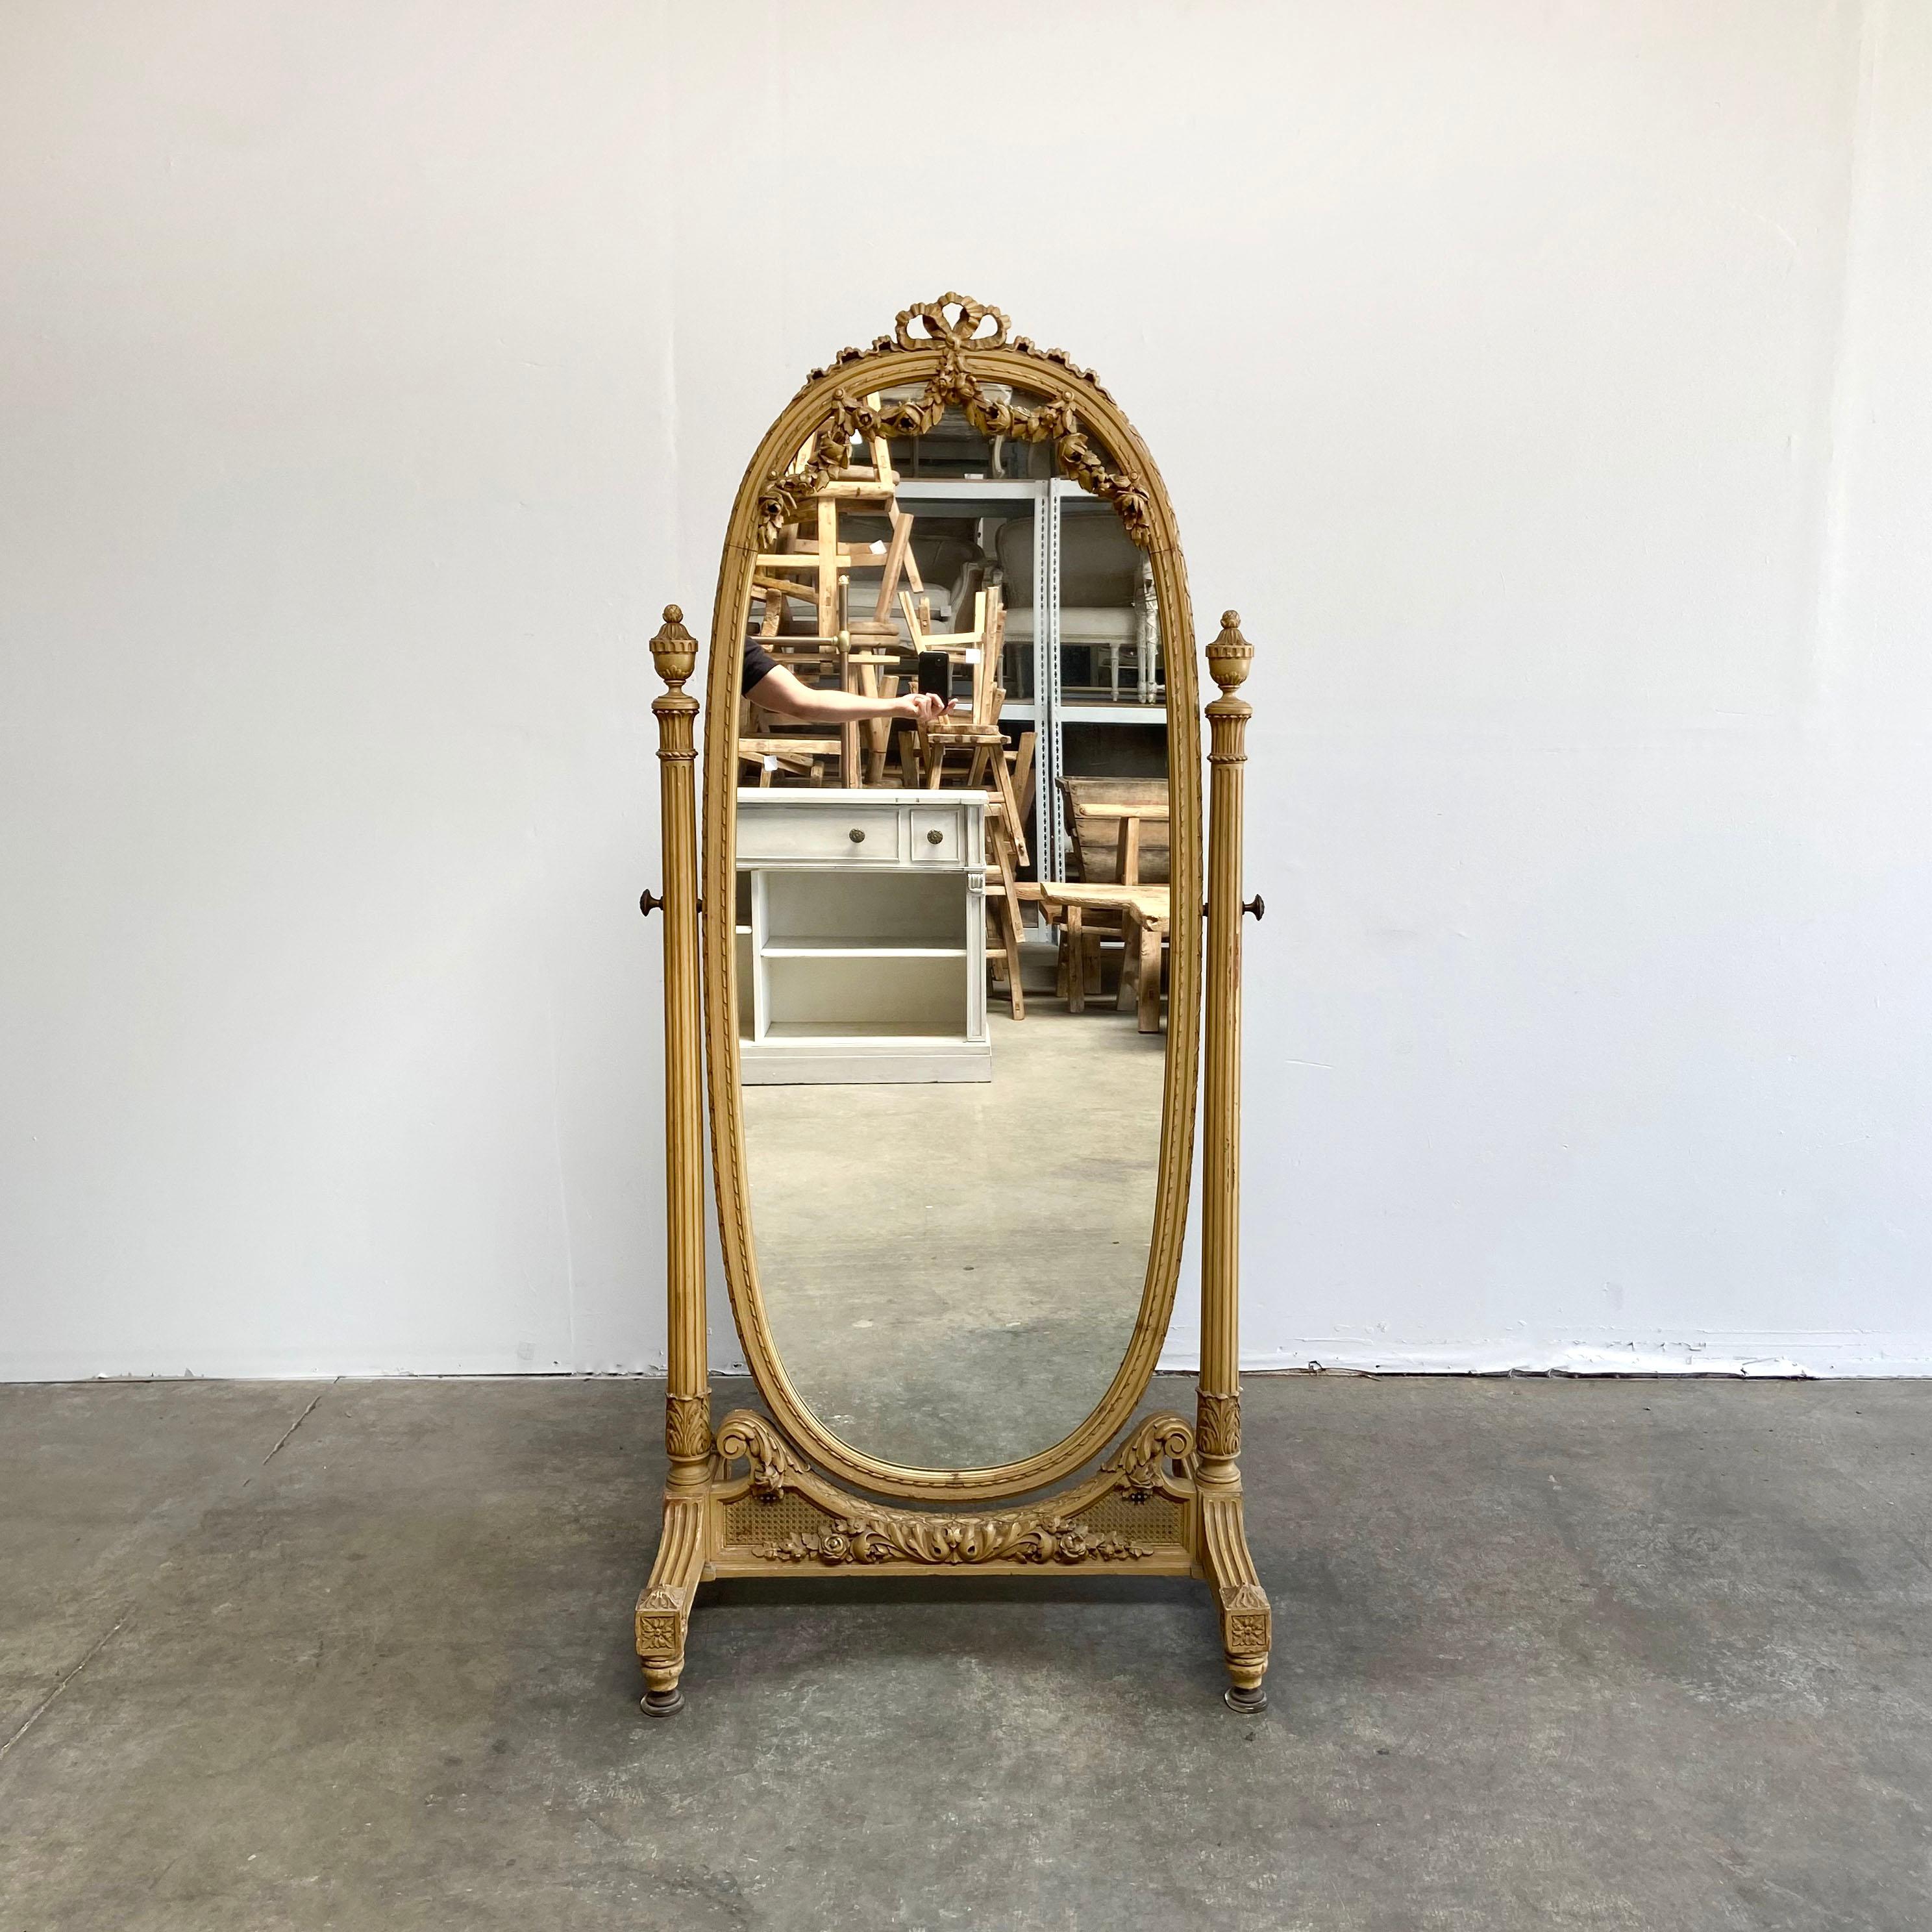 Antique Barbola roses swag carved Cheval mirror original finish.
Original finish, in a dark cream color. Beautiful carved detailed roses swag down over the mirror, with ribbon carvings. Adjustable mirror can swivel and tilt front to back. Can be